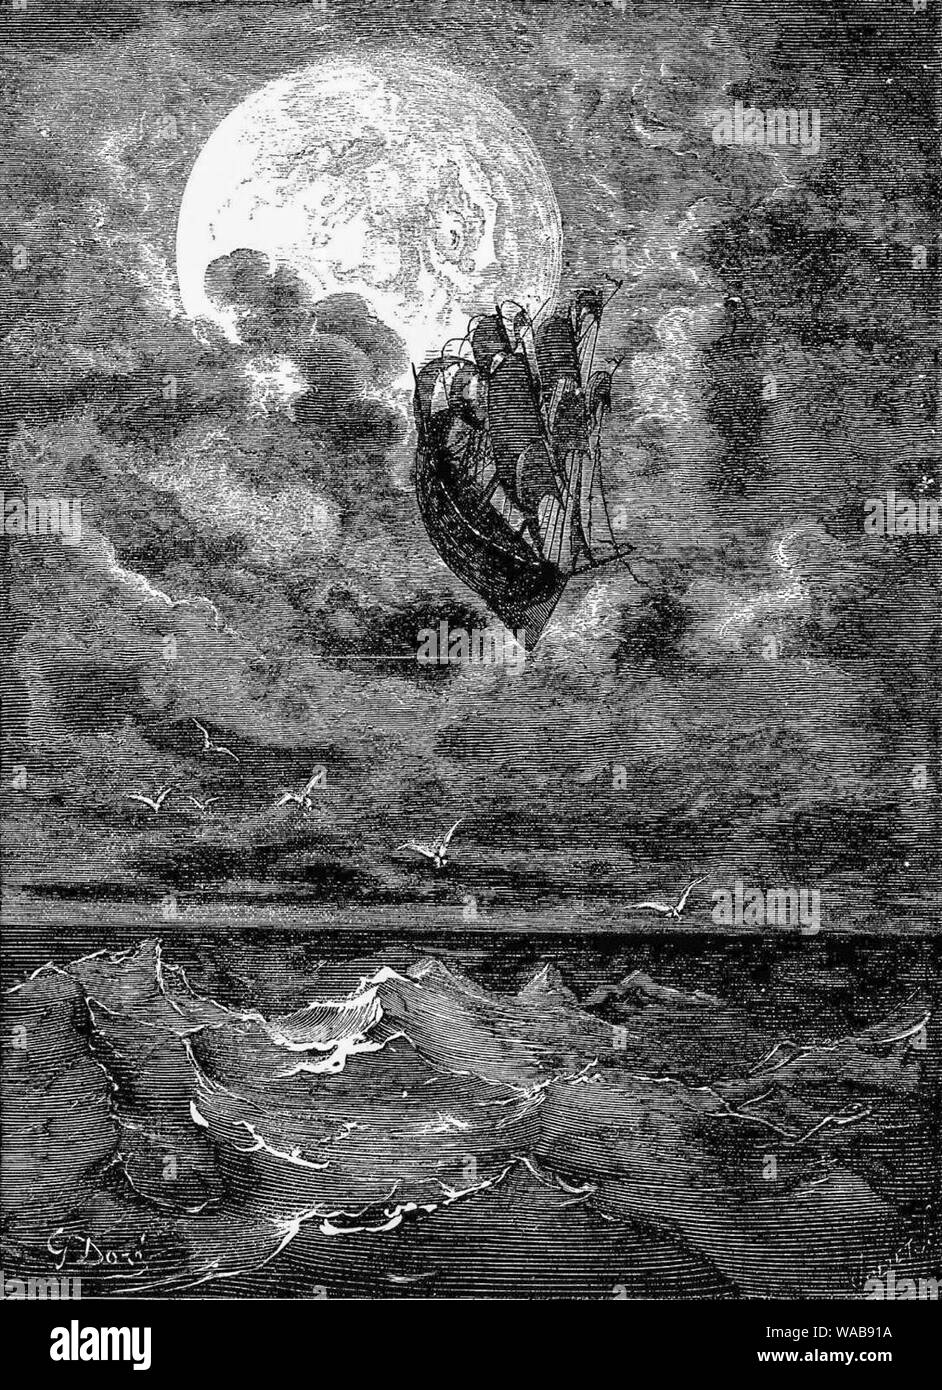 Gustave Doré, A Voyage to the Moon, from, The Adventures of Baron von Münchhausen, engraving, circa 1868 Stock Photo